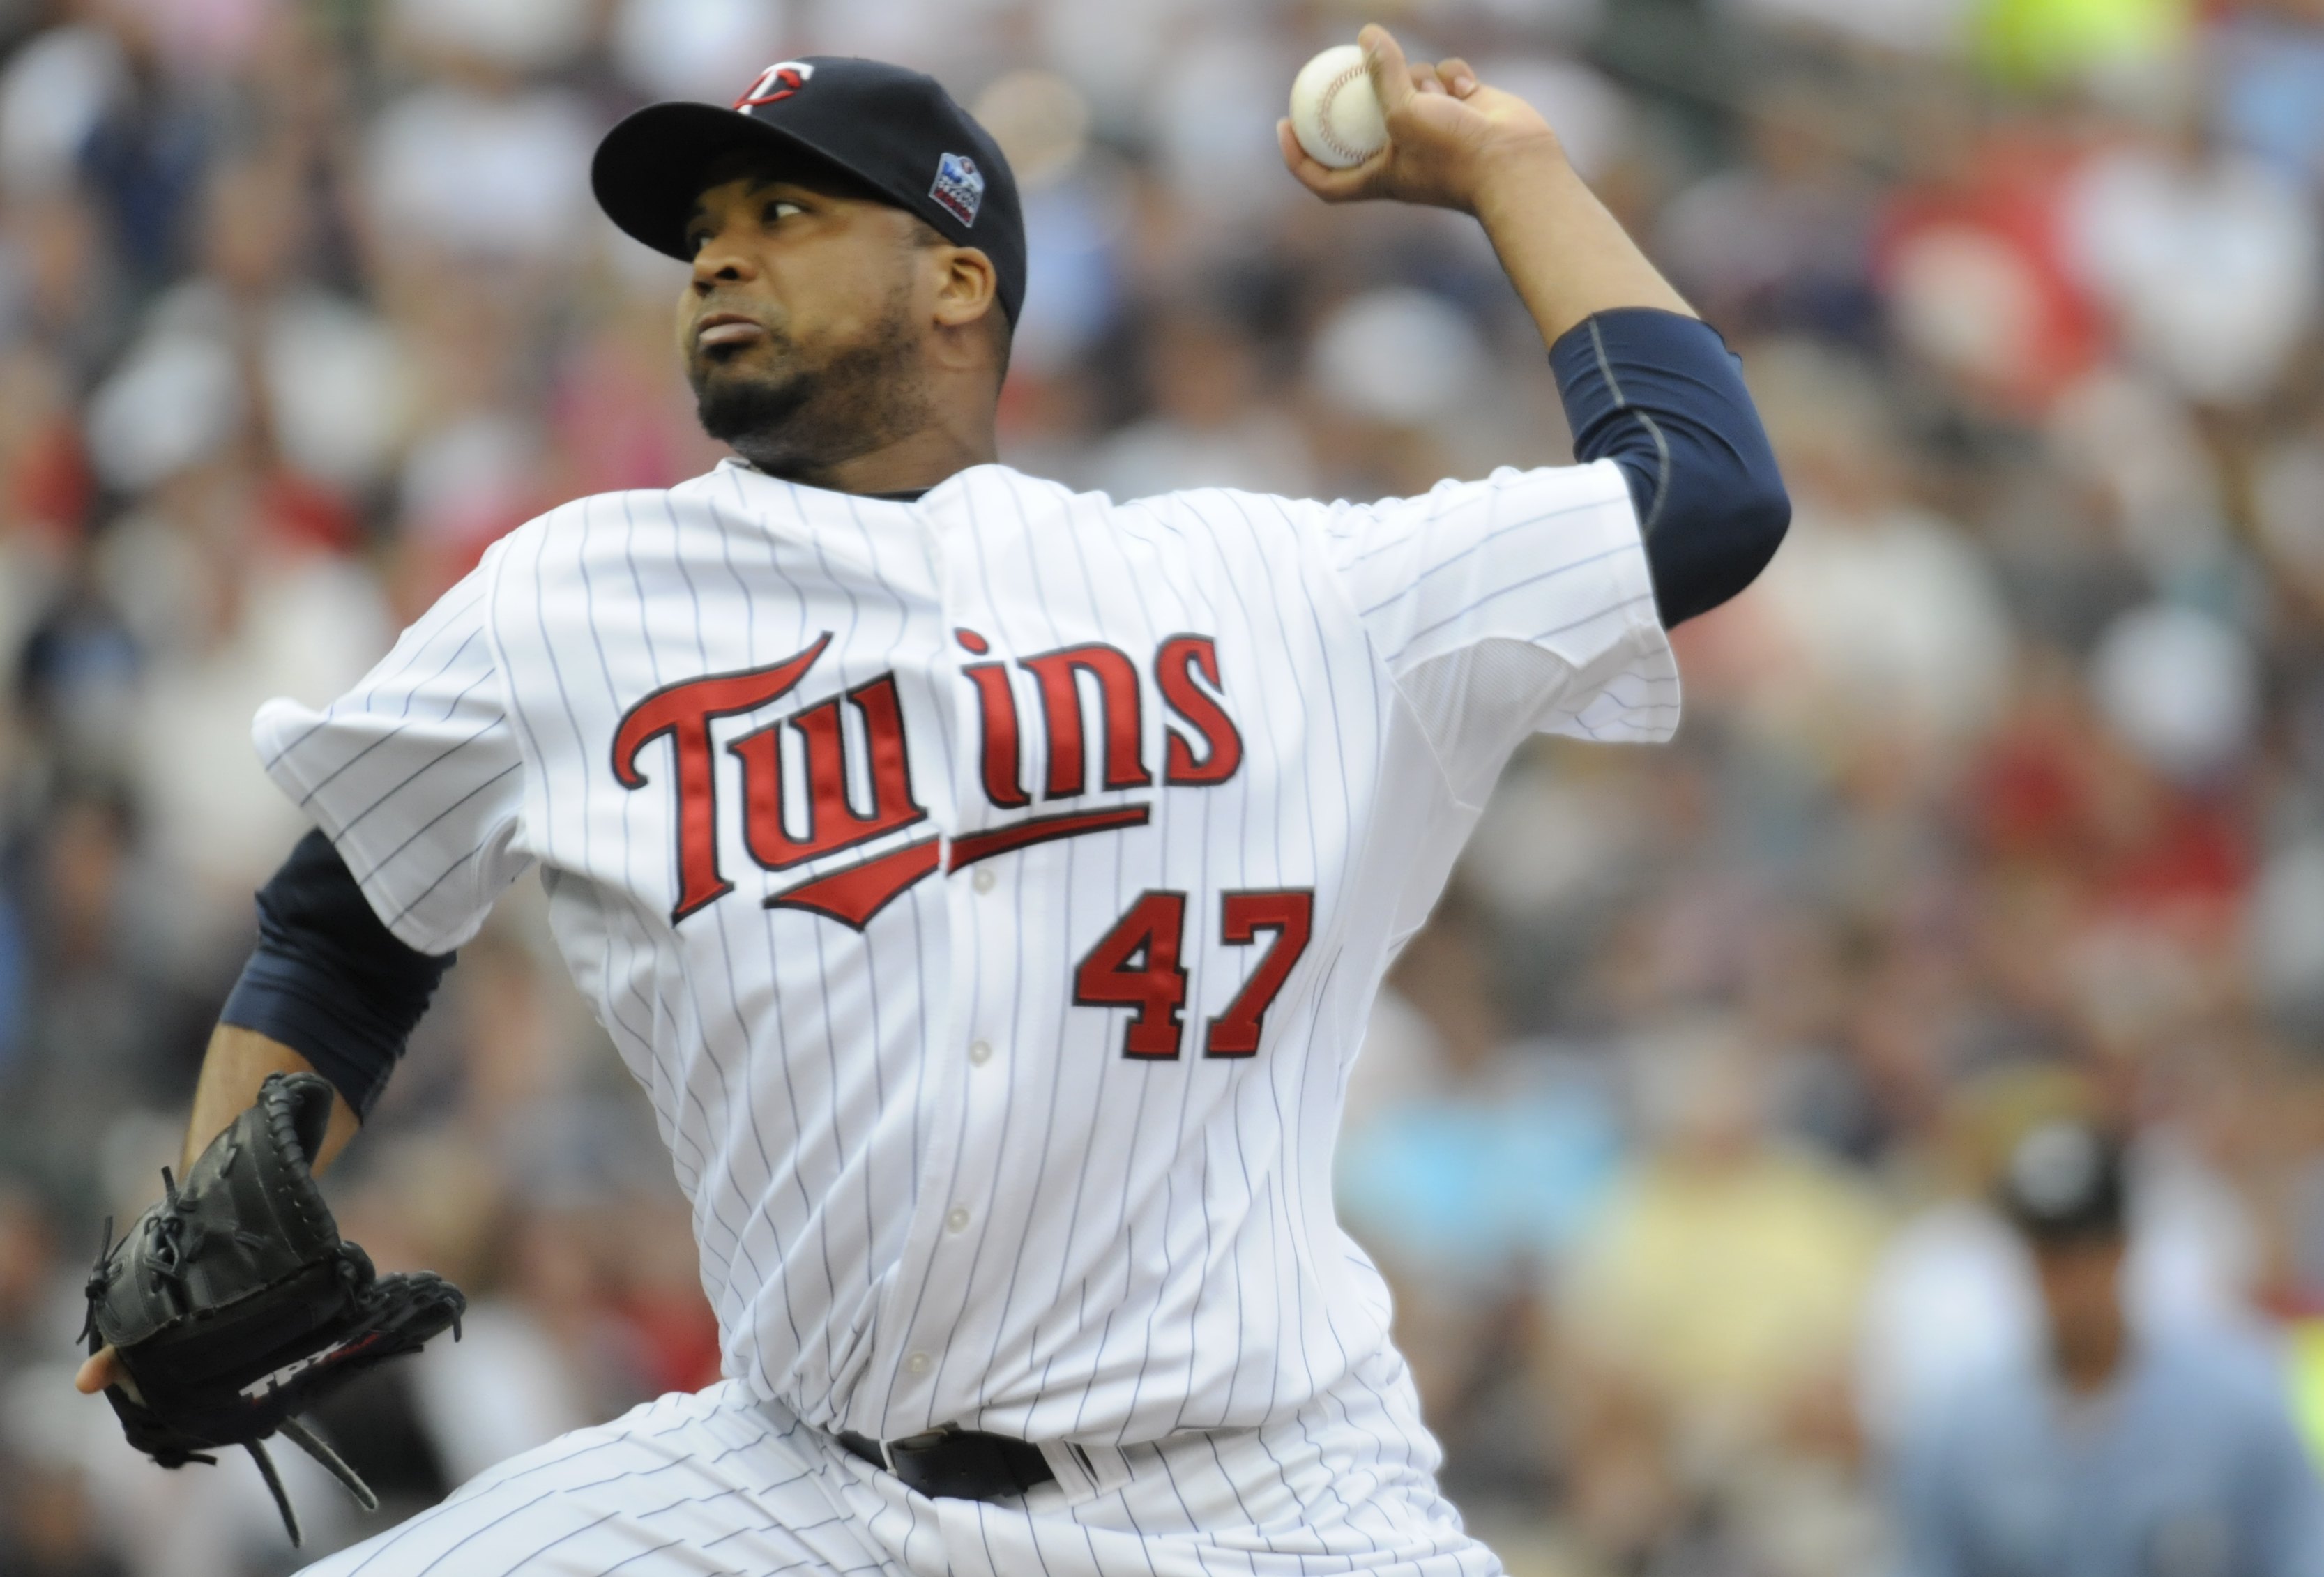 MINNEAPOLIS, MN - MAY 26: Francisco Liriano #47 of the Minnesota Twins pitches in the first inning against the New York Yankees during the game on May 26, 2010 at Target Field in Minneapolis, Minnesota. The Yankees defeated the Twins 3-2. (Photo by Hannah